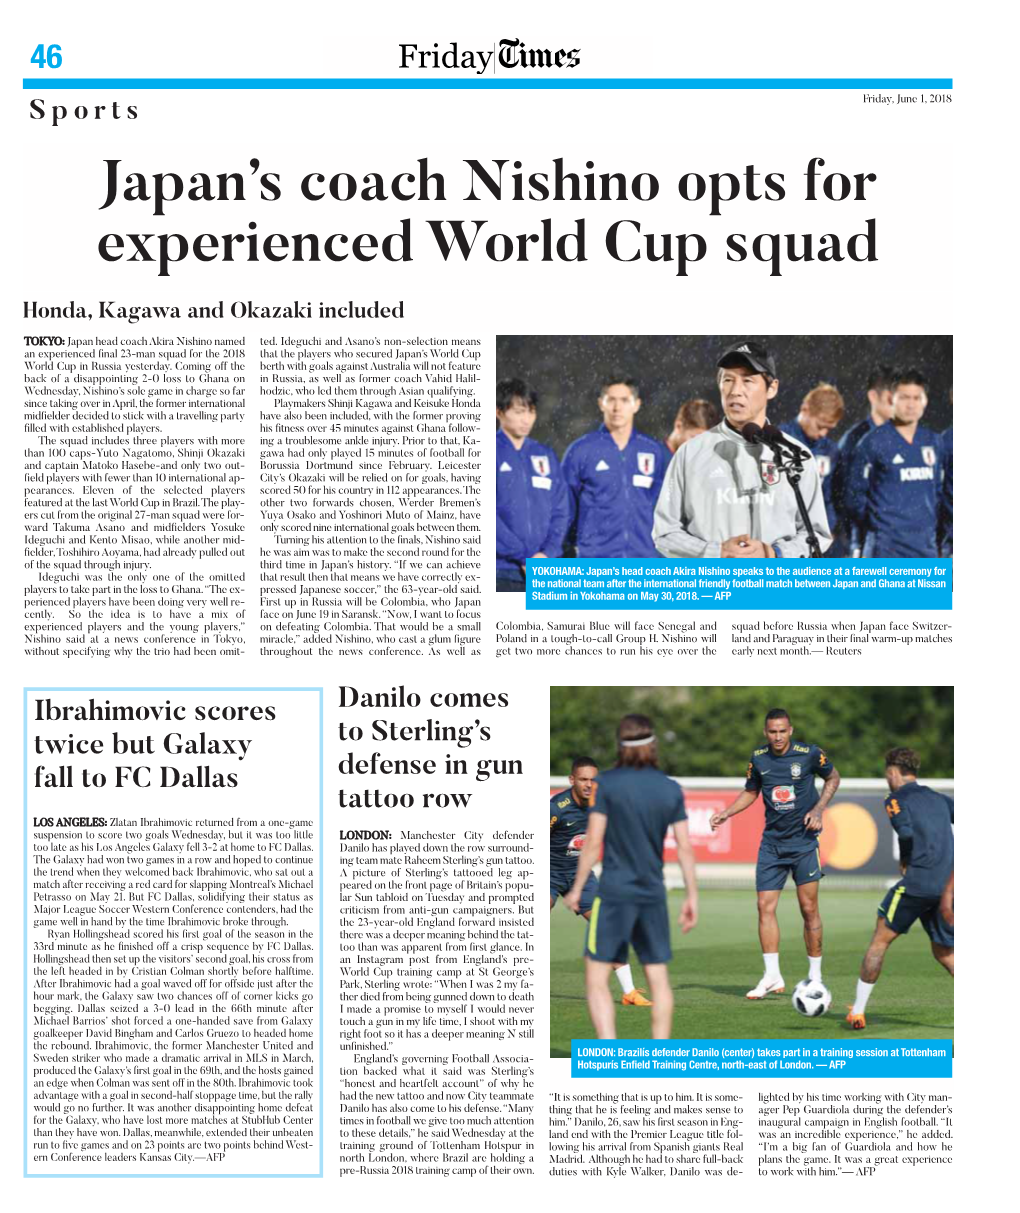 Japan's Coach Nishino Opts for Experienced World Cup Squad